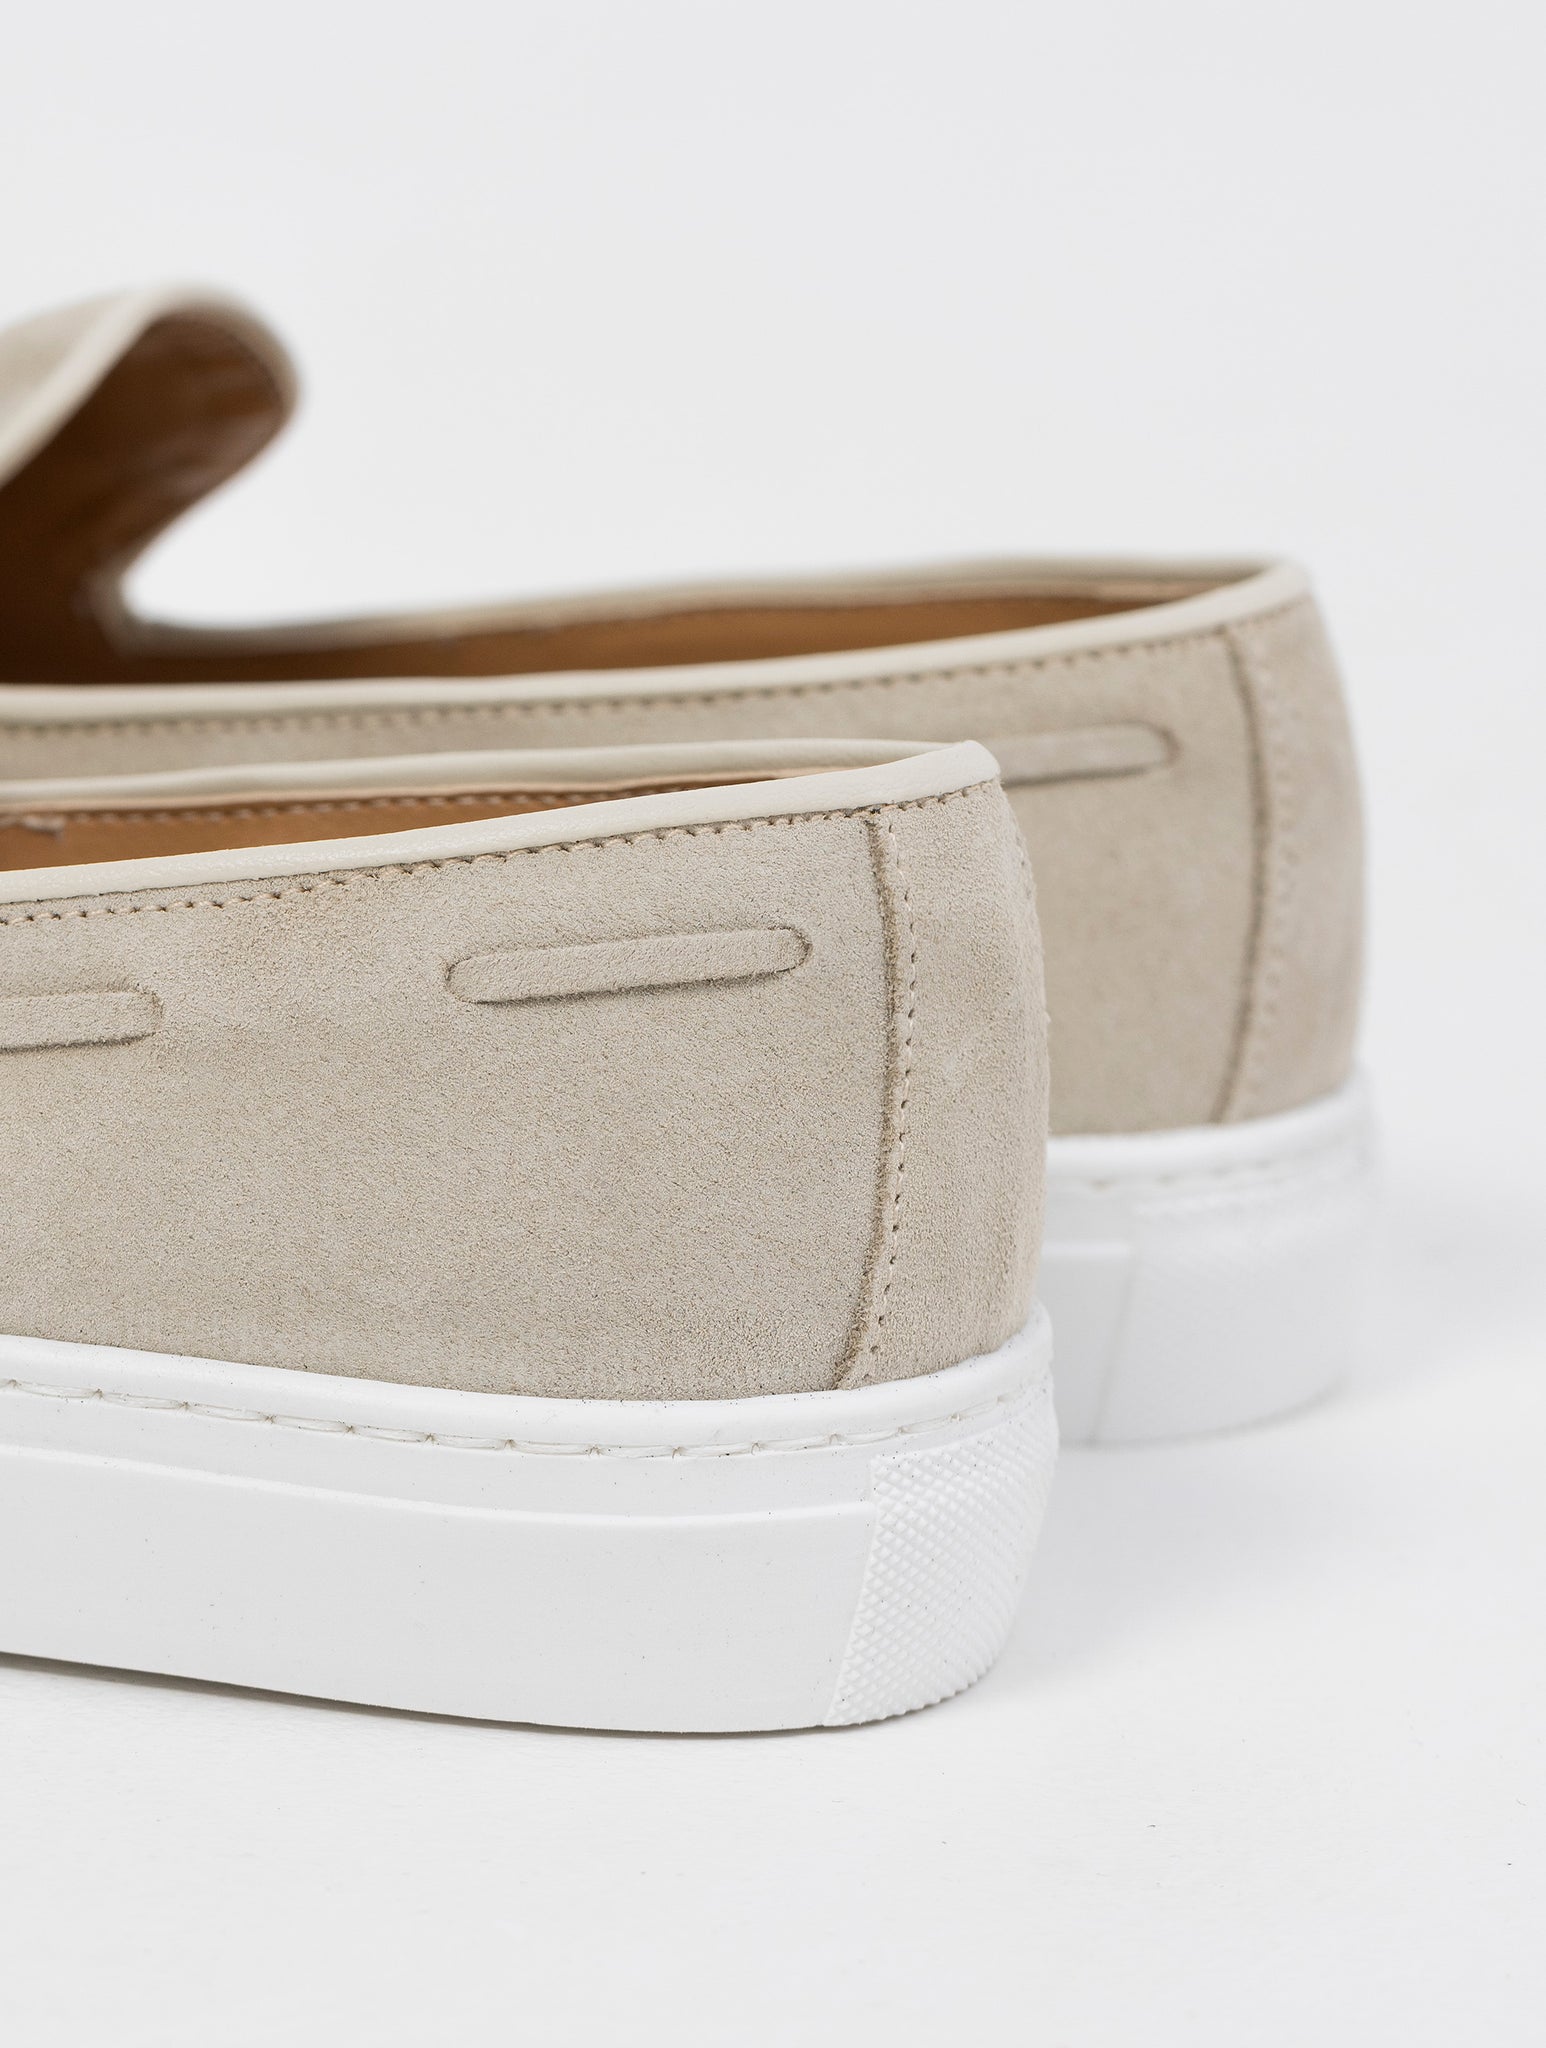 SLIP-ON CRUST LEATHER IN SAND